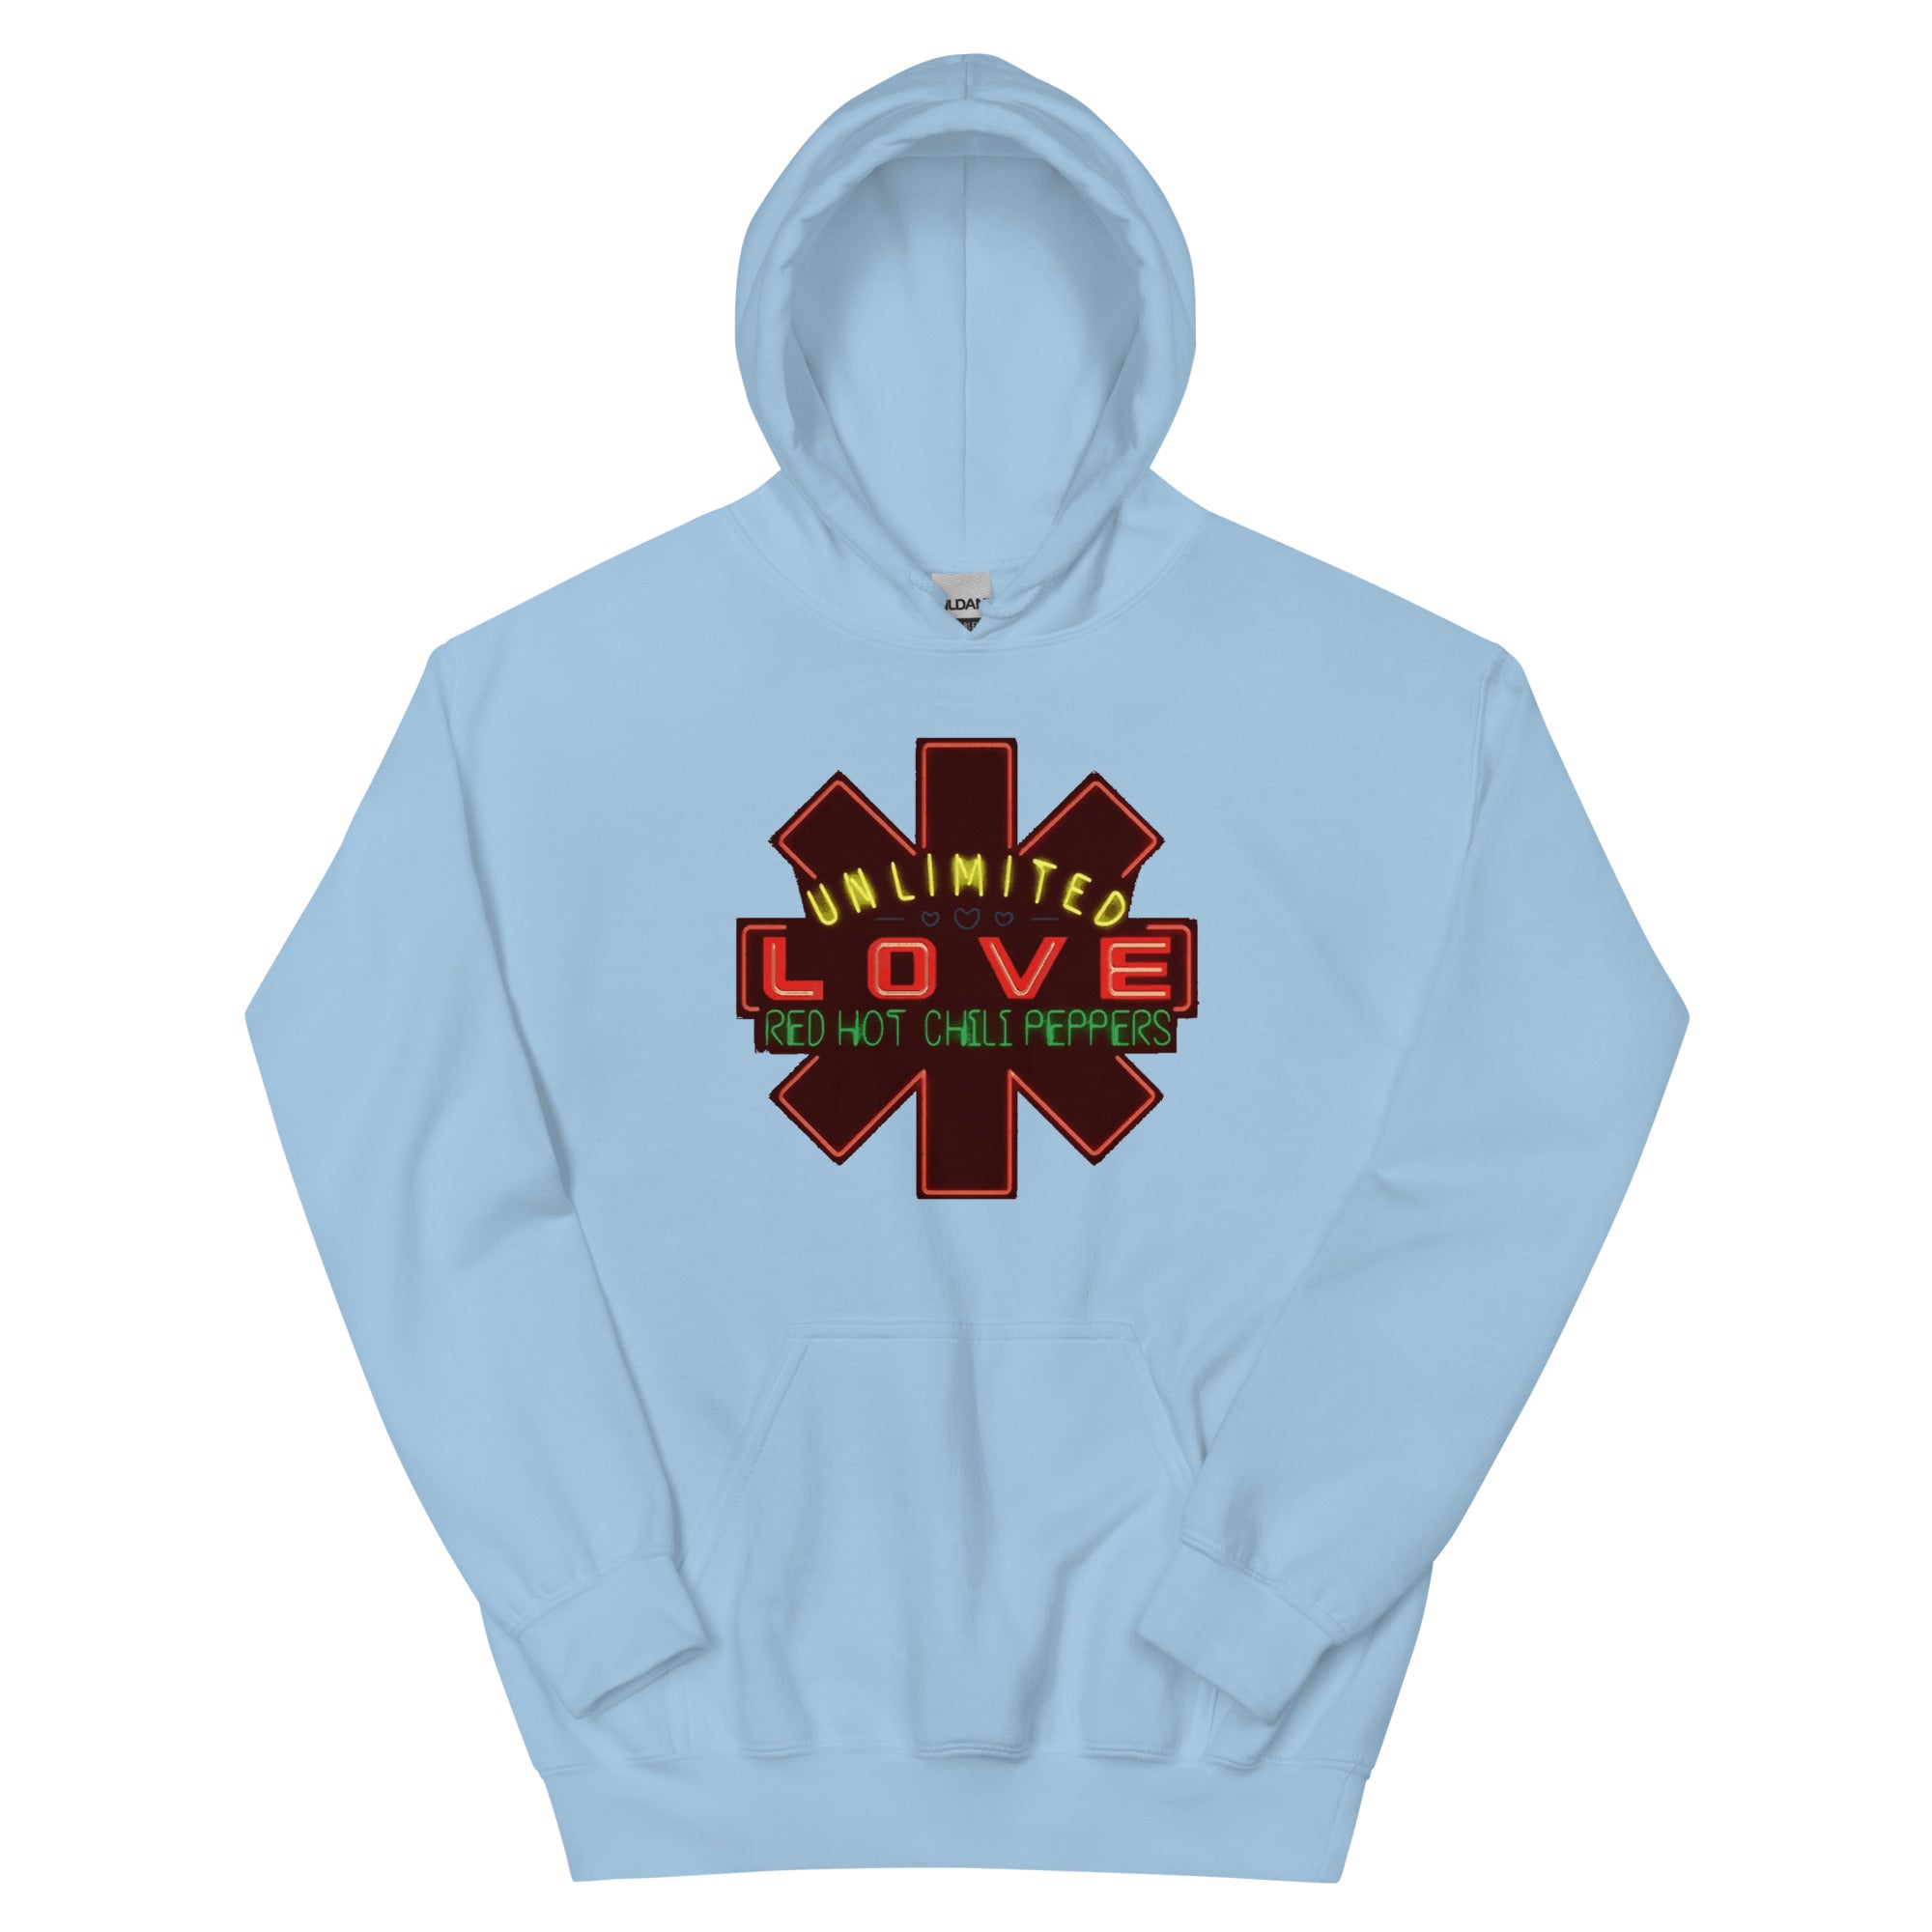 Red Hot Chili Peppers x Unlimited Love Unisex Hoodie